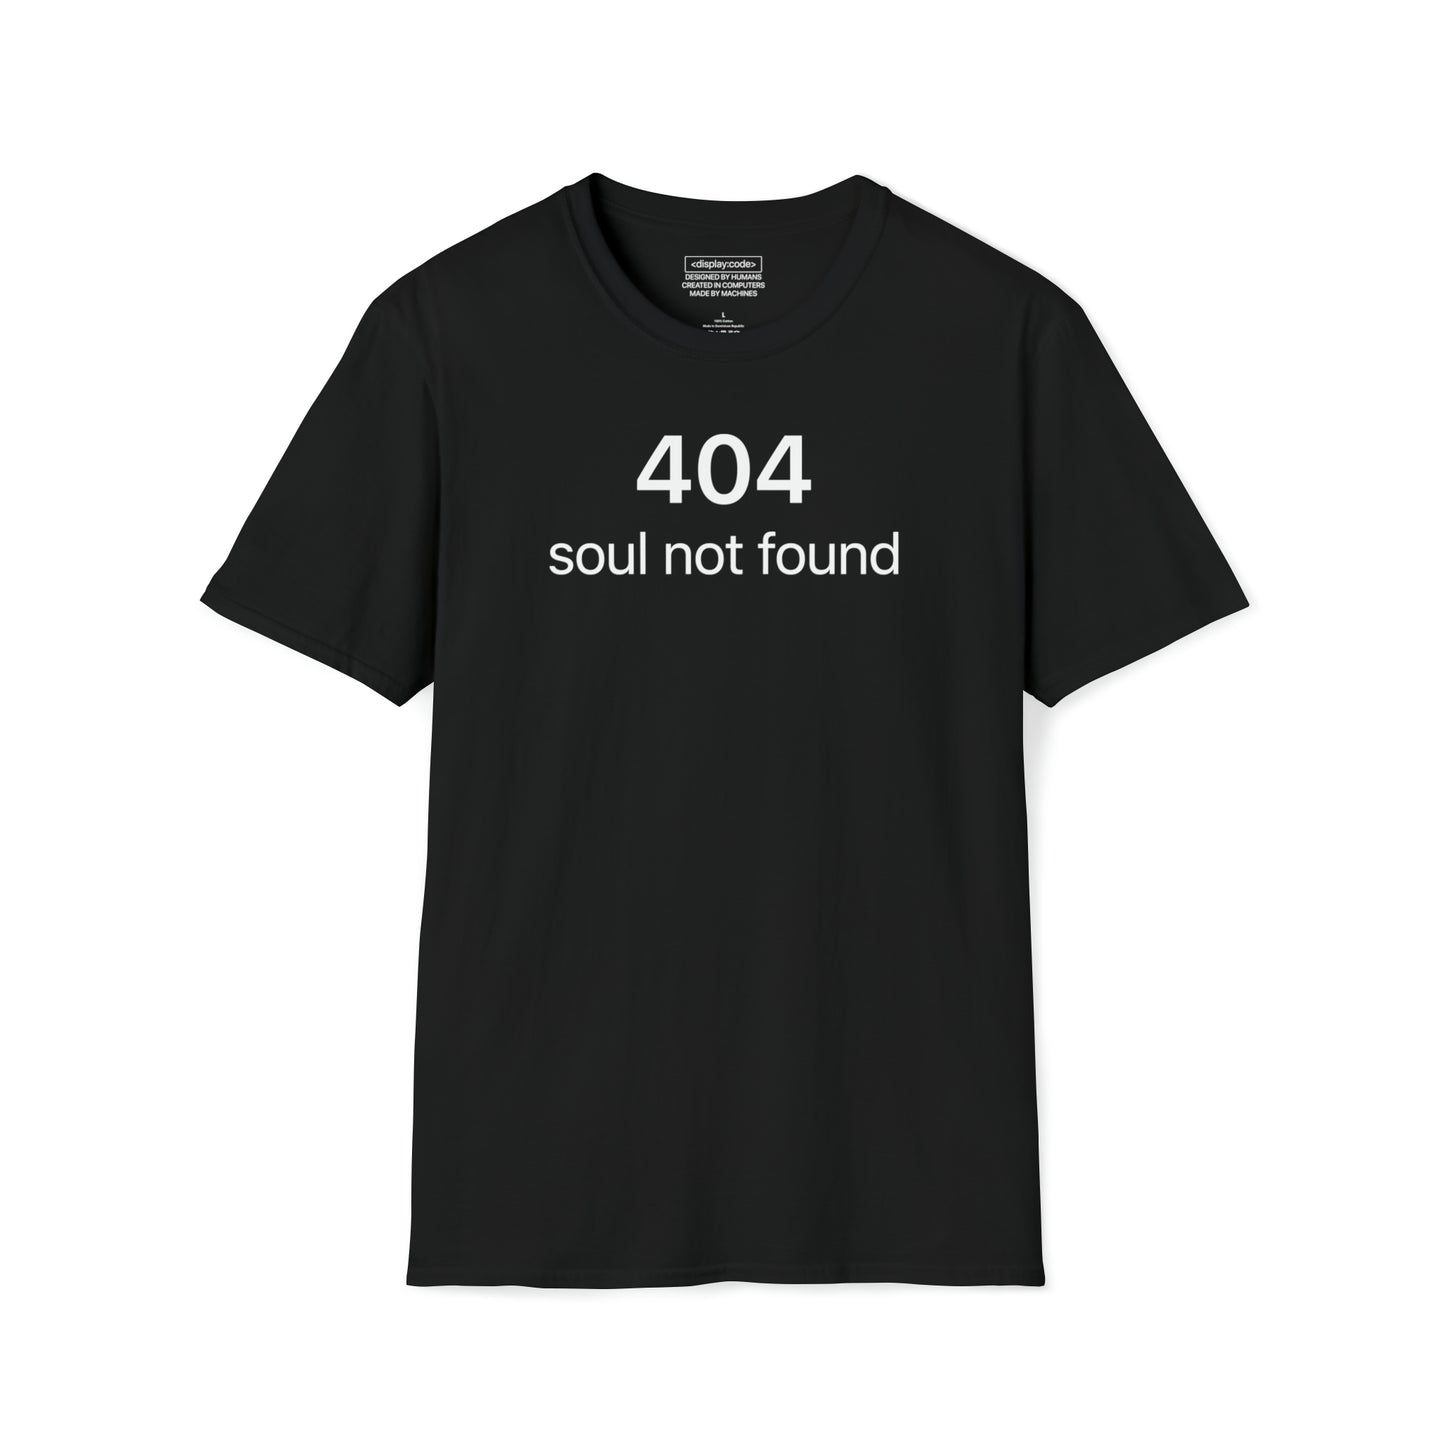 404 soul not found